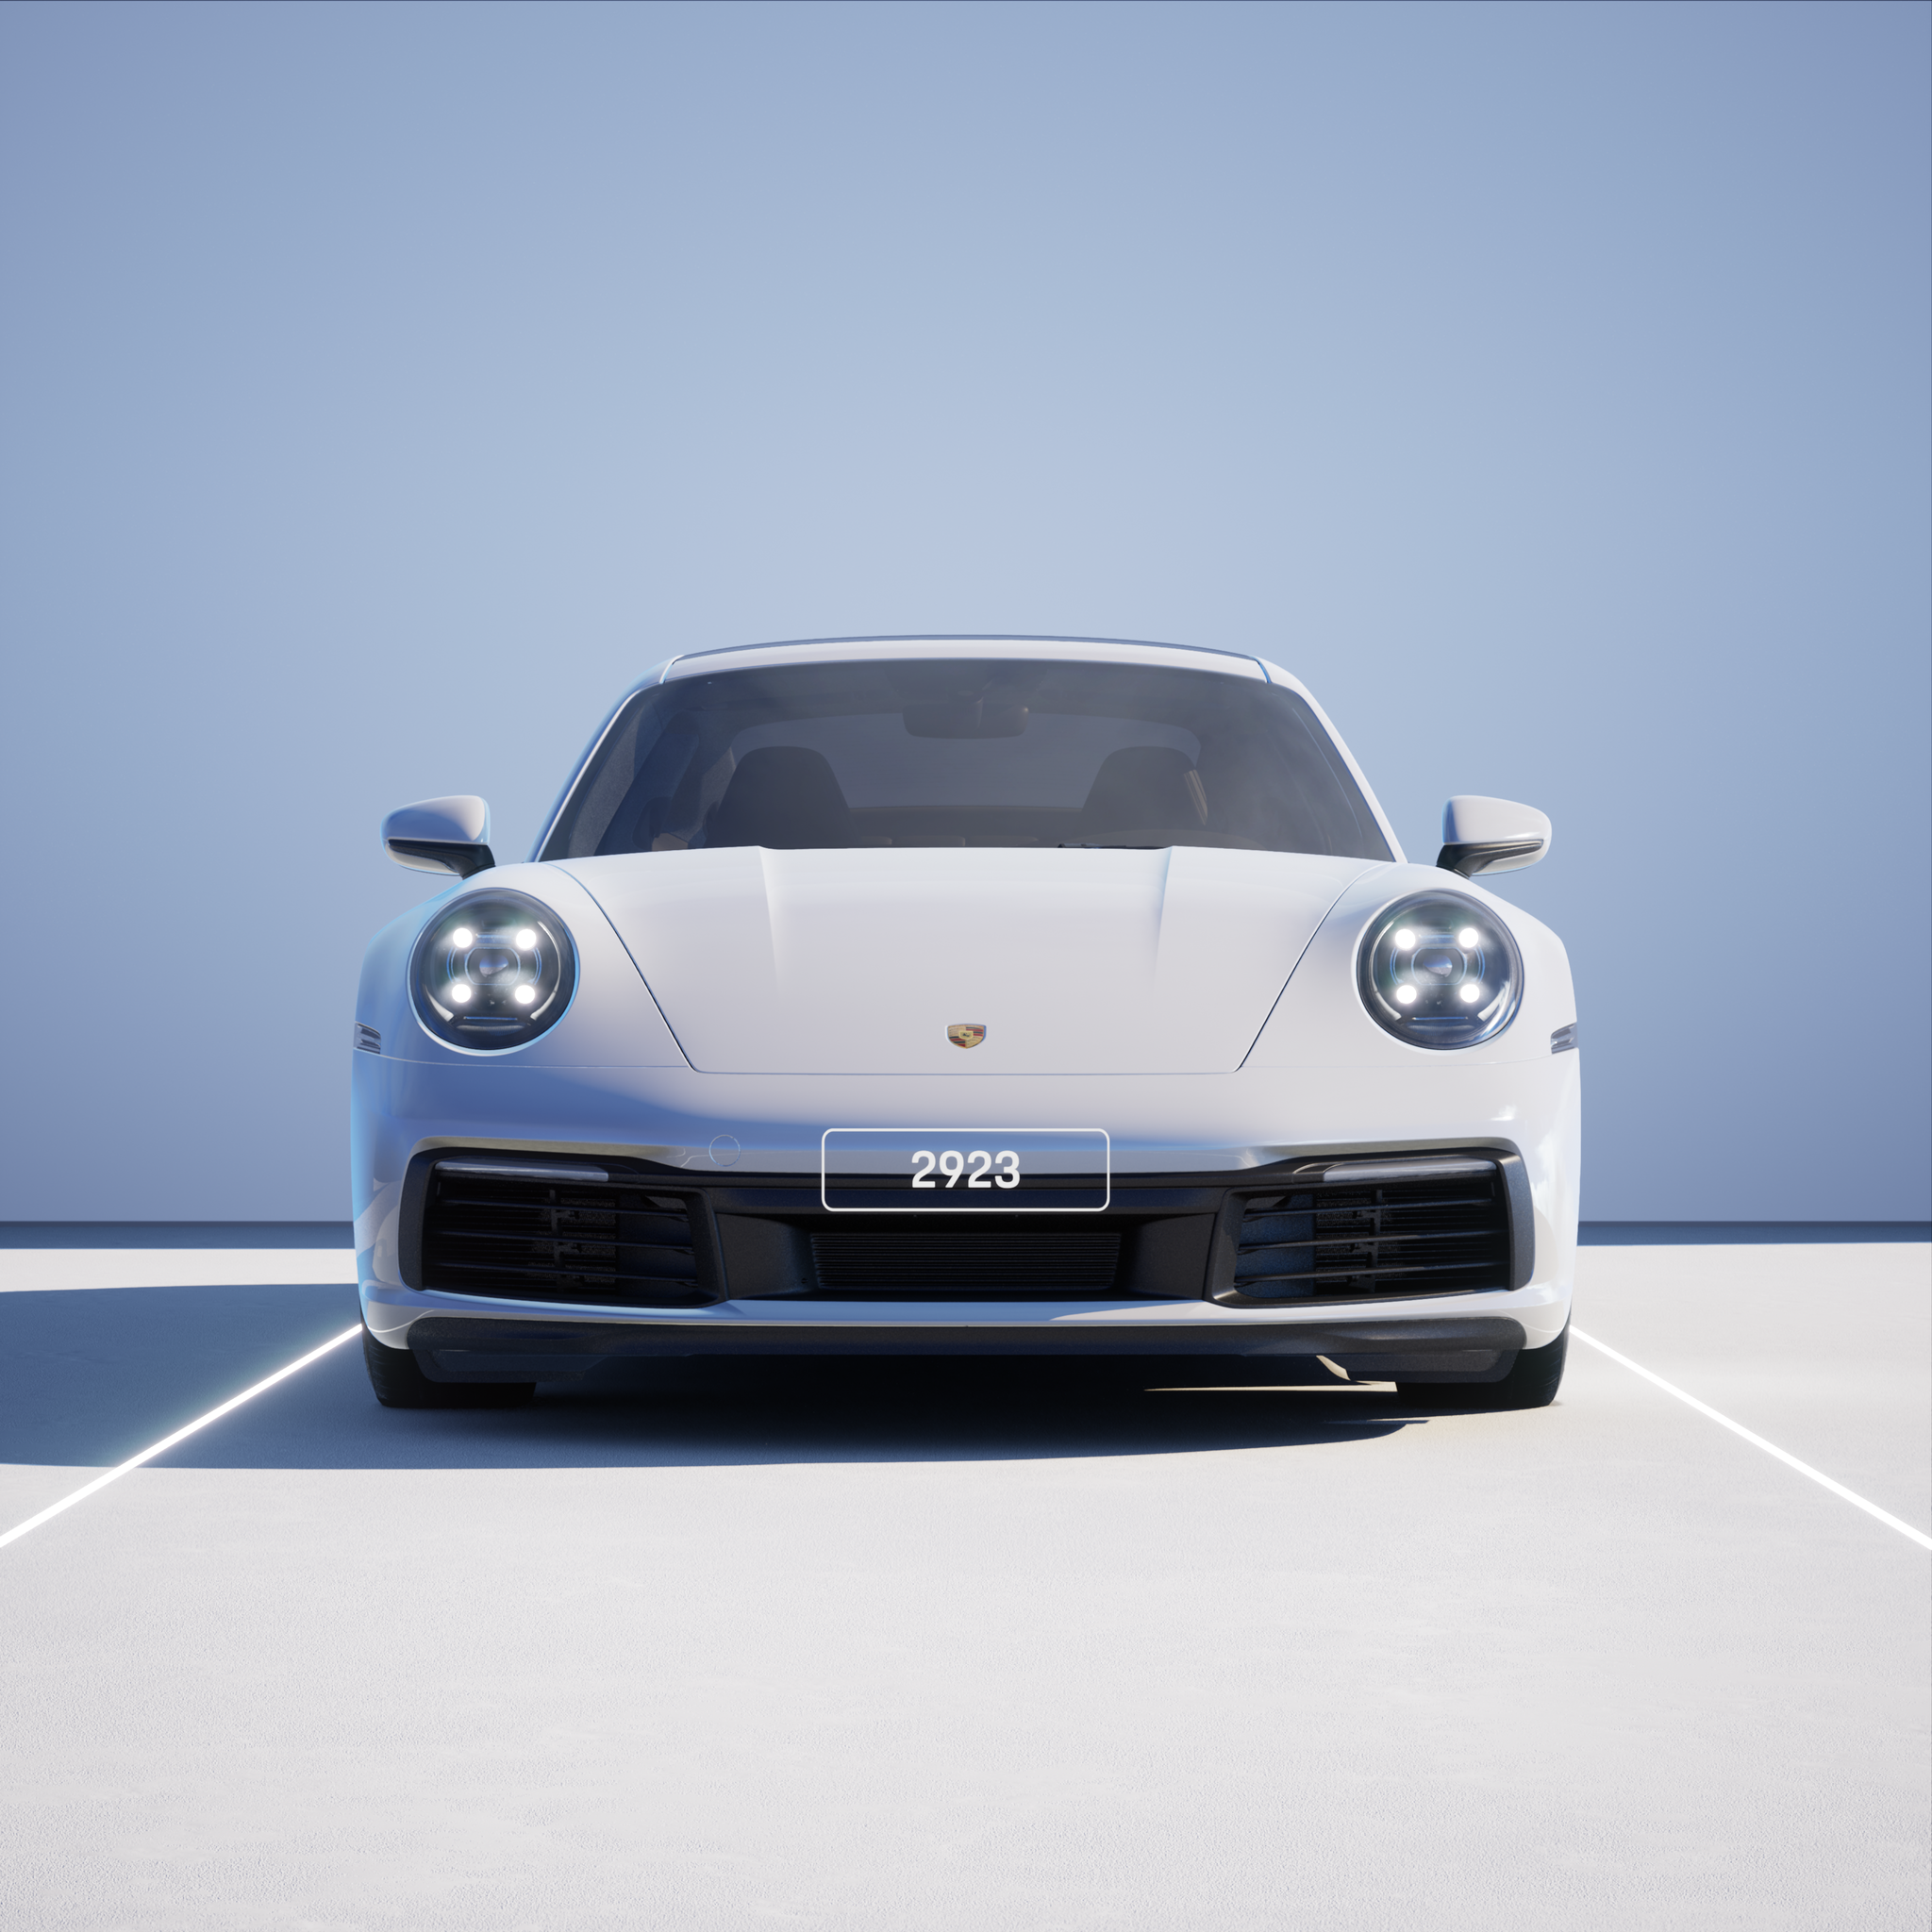 The PORSCHΞ 911 2923 image in phase